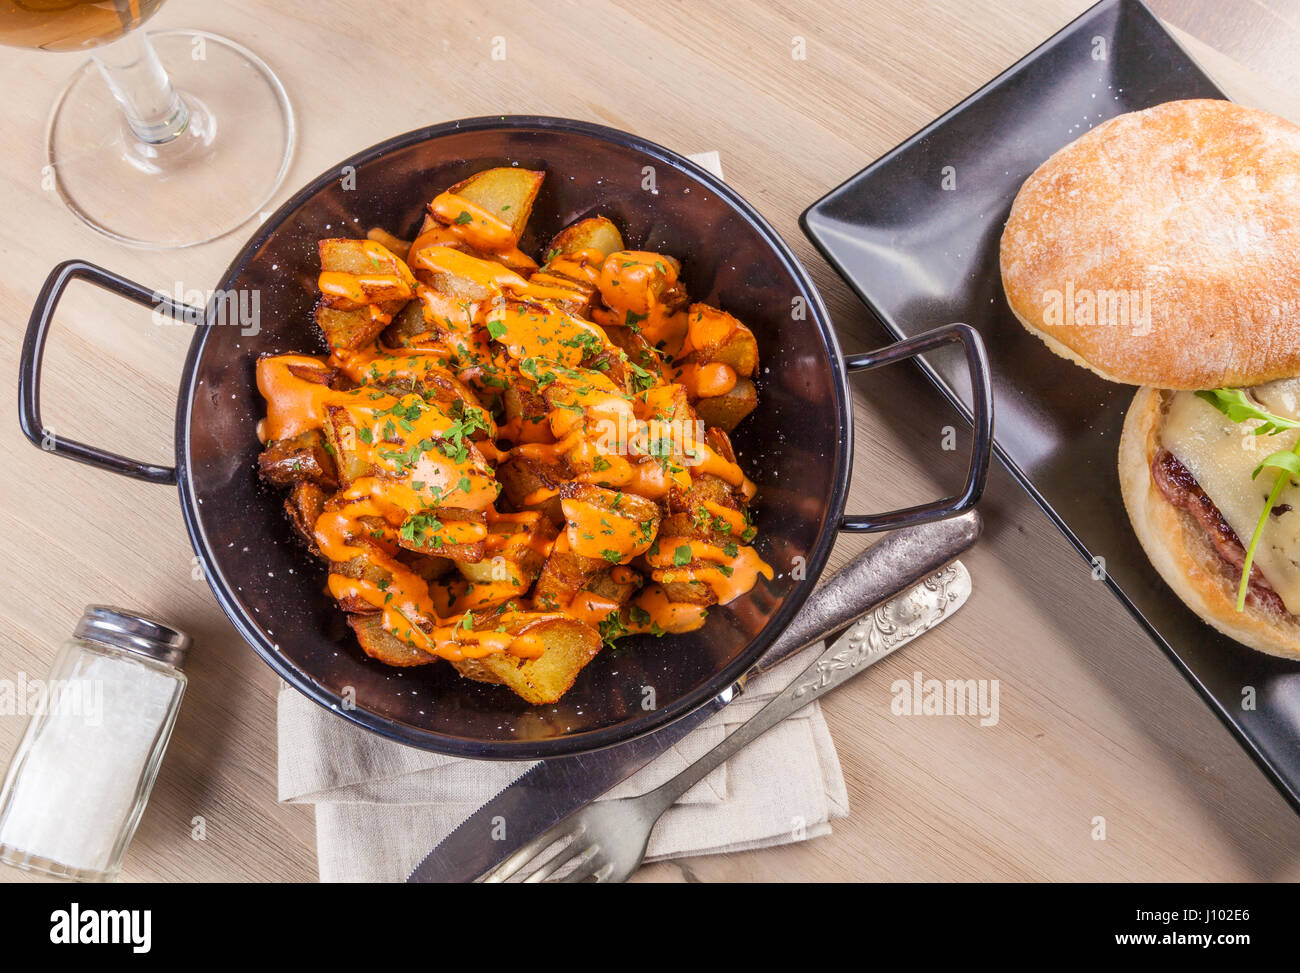 Patatas bravas, spicy potatoes, a typical Spanish dish with fried potato cubes and a spicy garlic sauce. Stock Photo